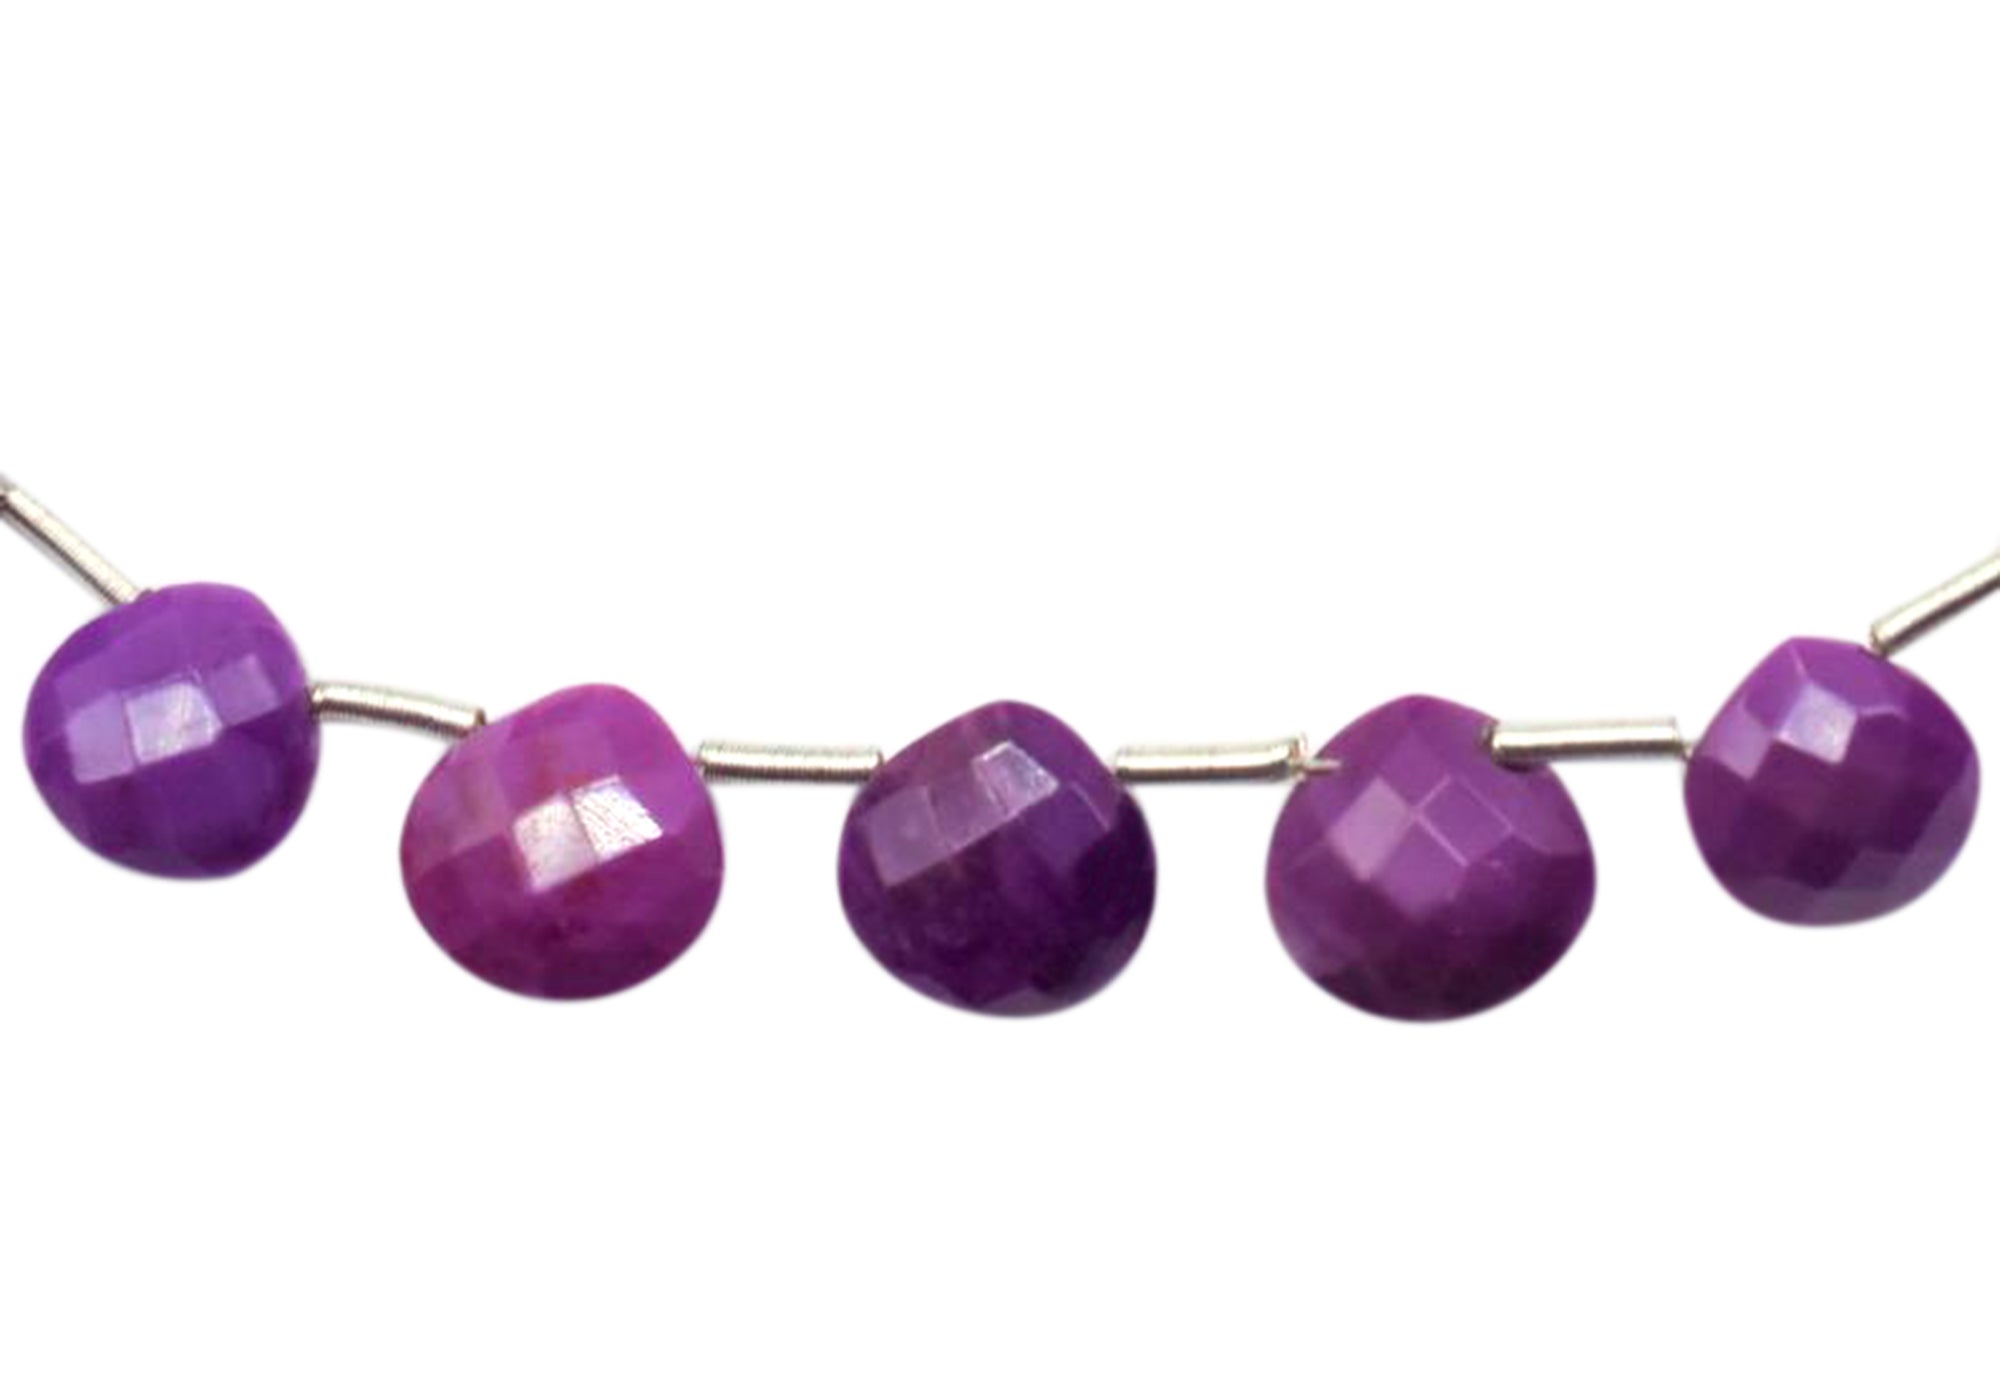 Mojave Purple Turquoise 8 To 9 MM Faceted Heart Shape Beads Strand